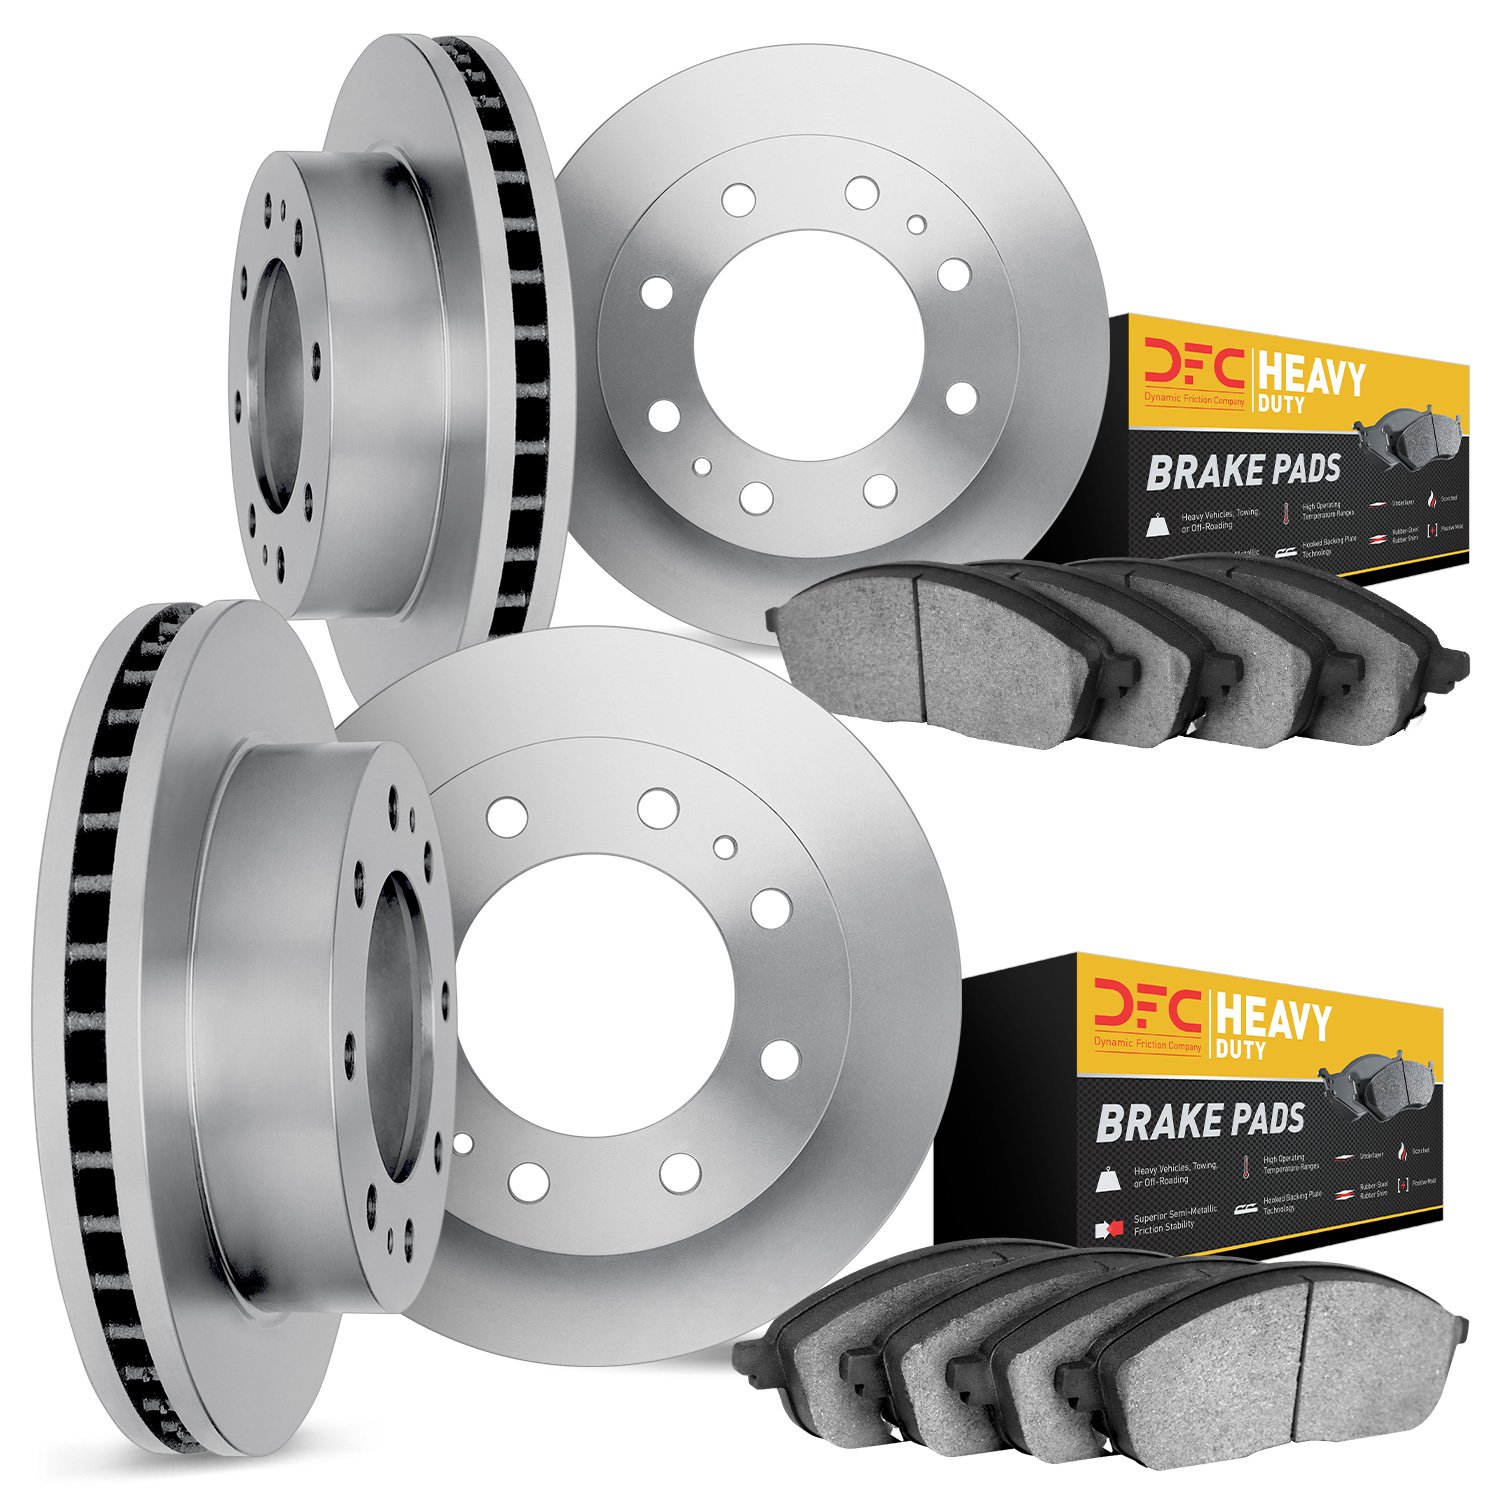 6204-48416 Brake Rotors w/Heavy-Duty Brake Pads Kit, 1999-2013 GM, Position: Front and Rear